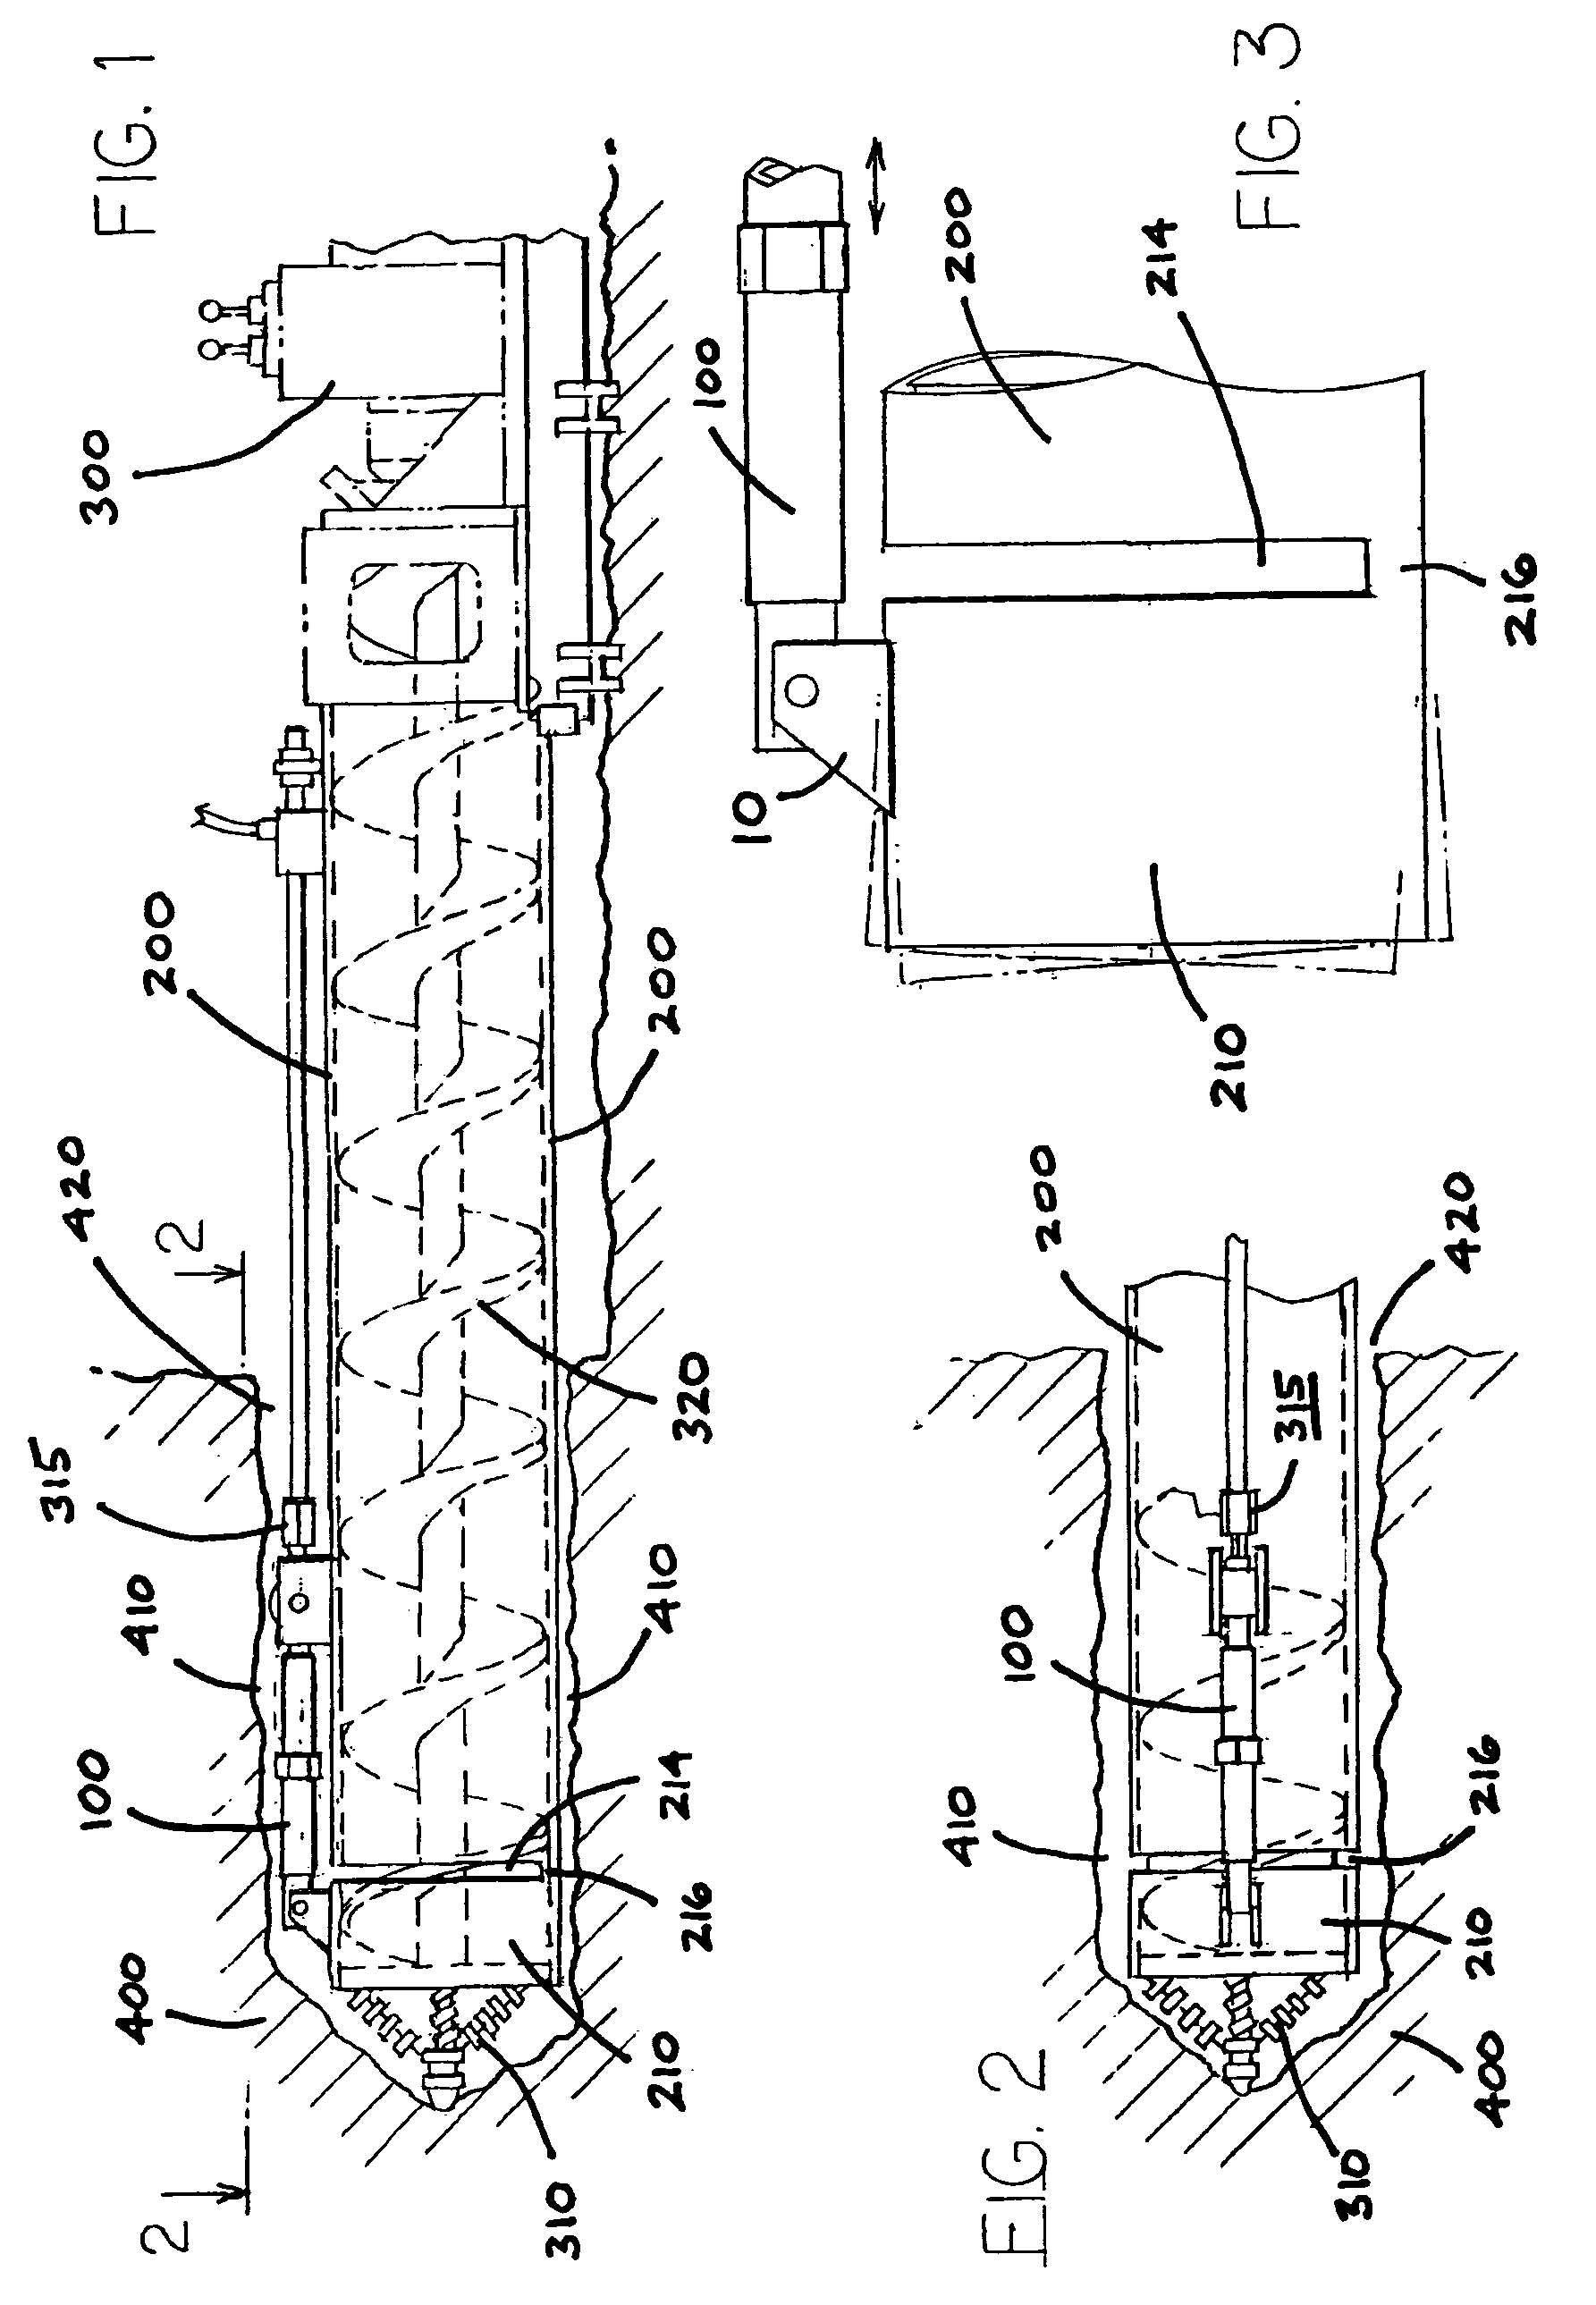 Apparatus for guiding and steering an earth boring machine and casing assembly